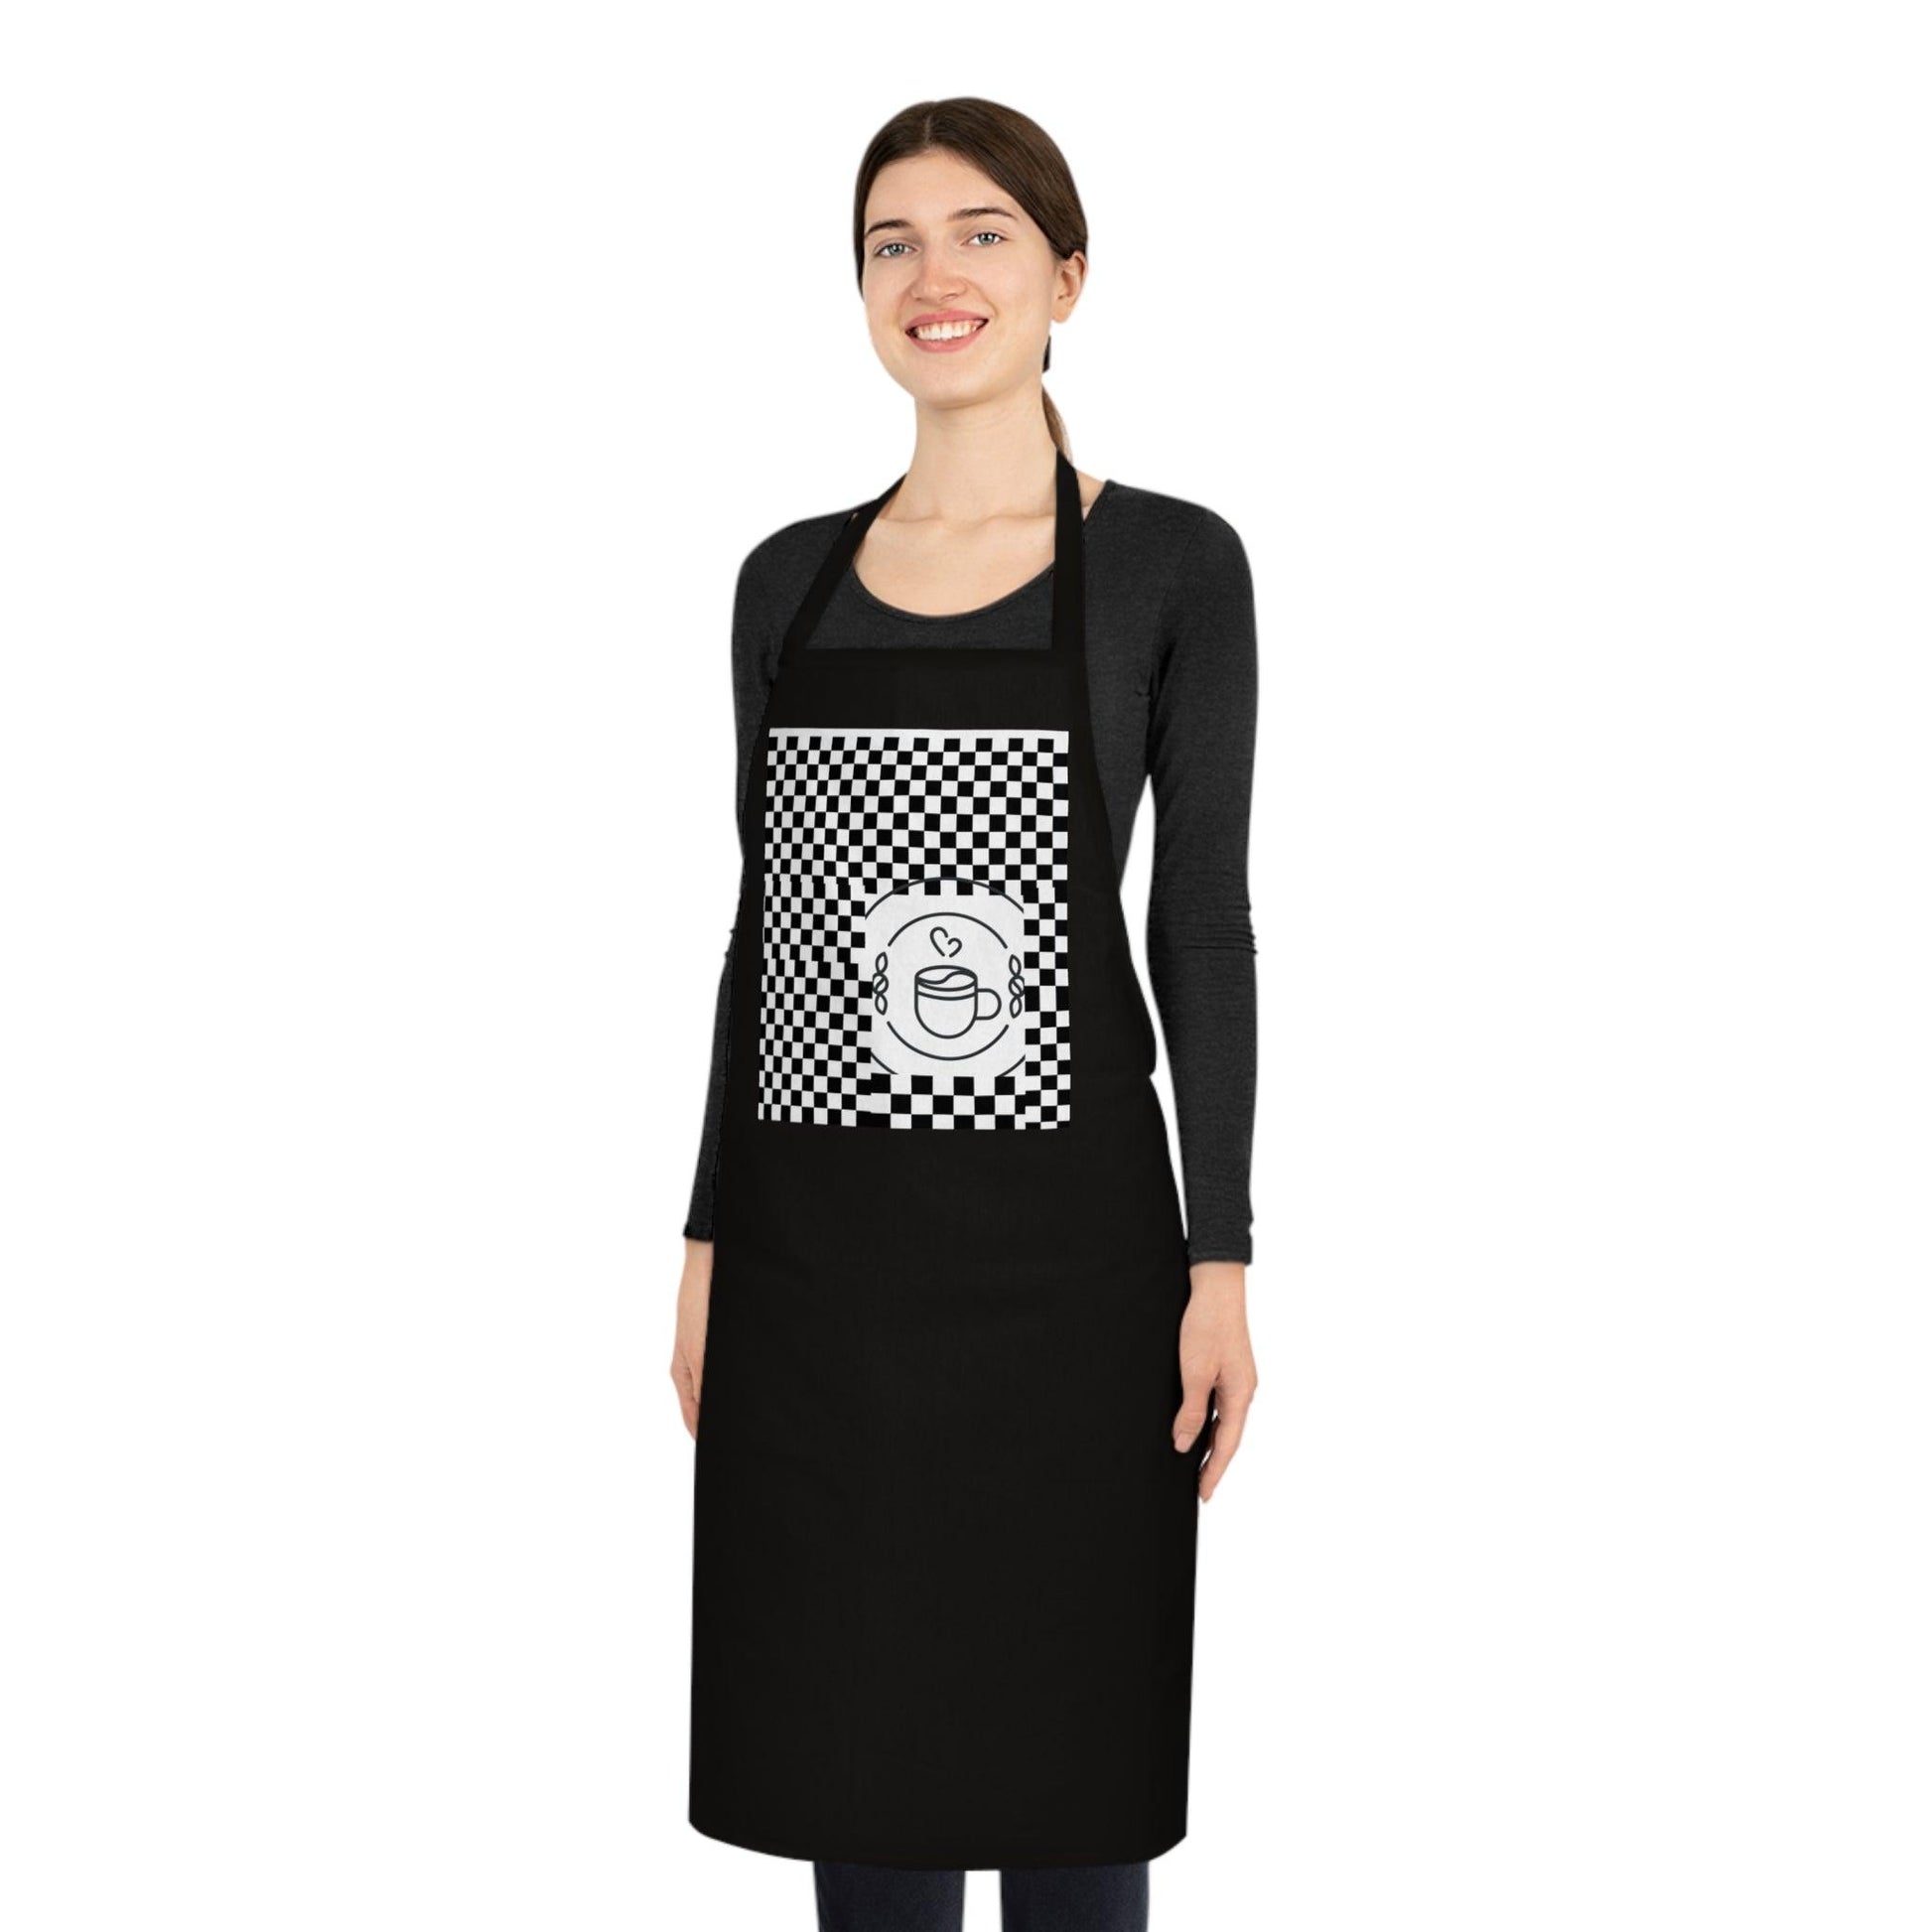 Cafe Adult BBQ Cotton Apron - COFFEEBRE